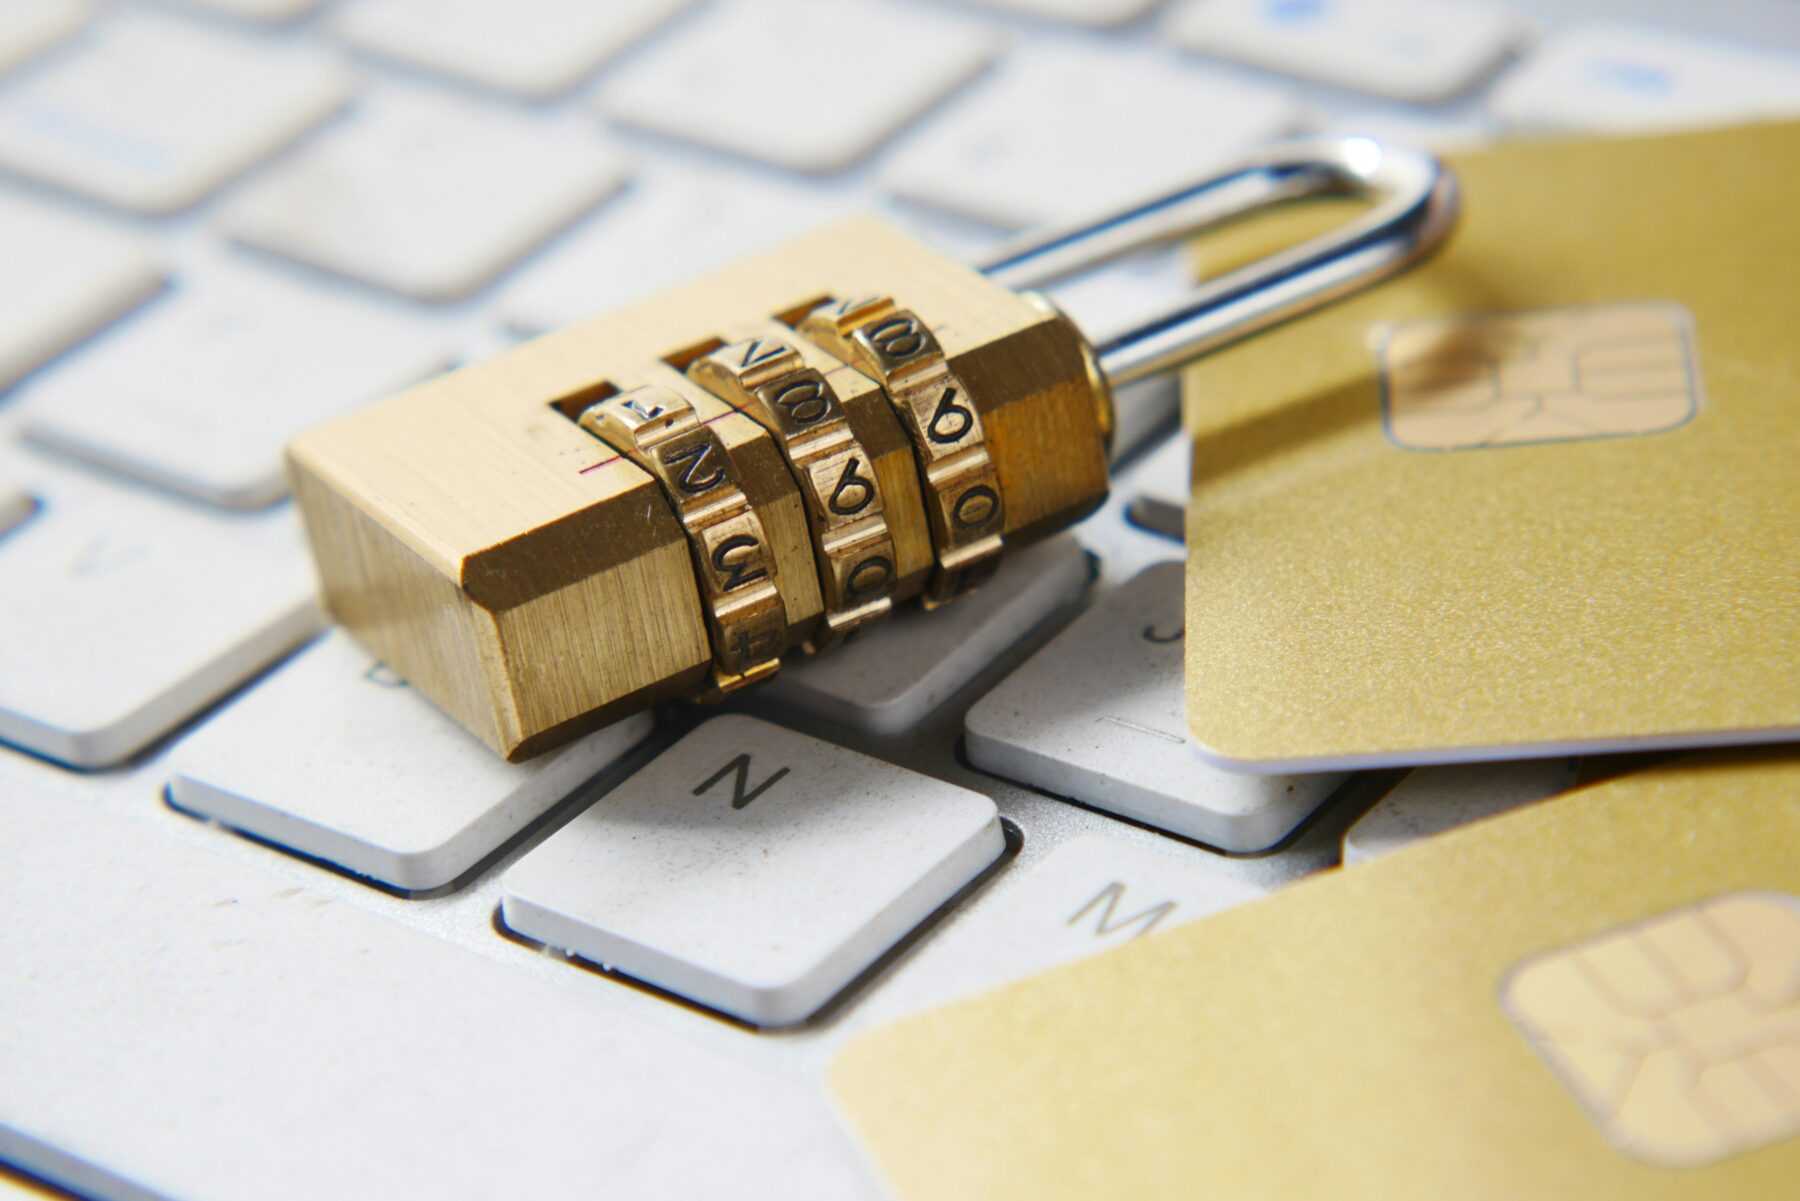 cybersecurity in real estate a golden, numerical lock placed on a white laptop keyboard along golden credit cards